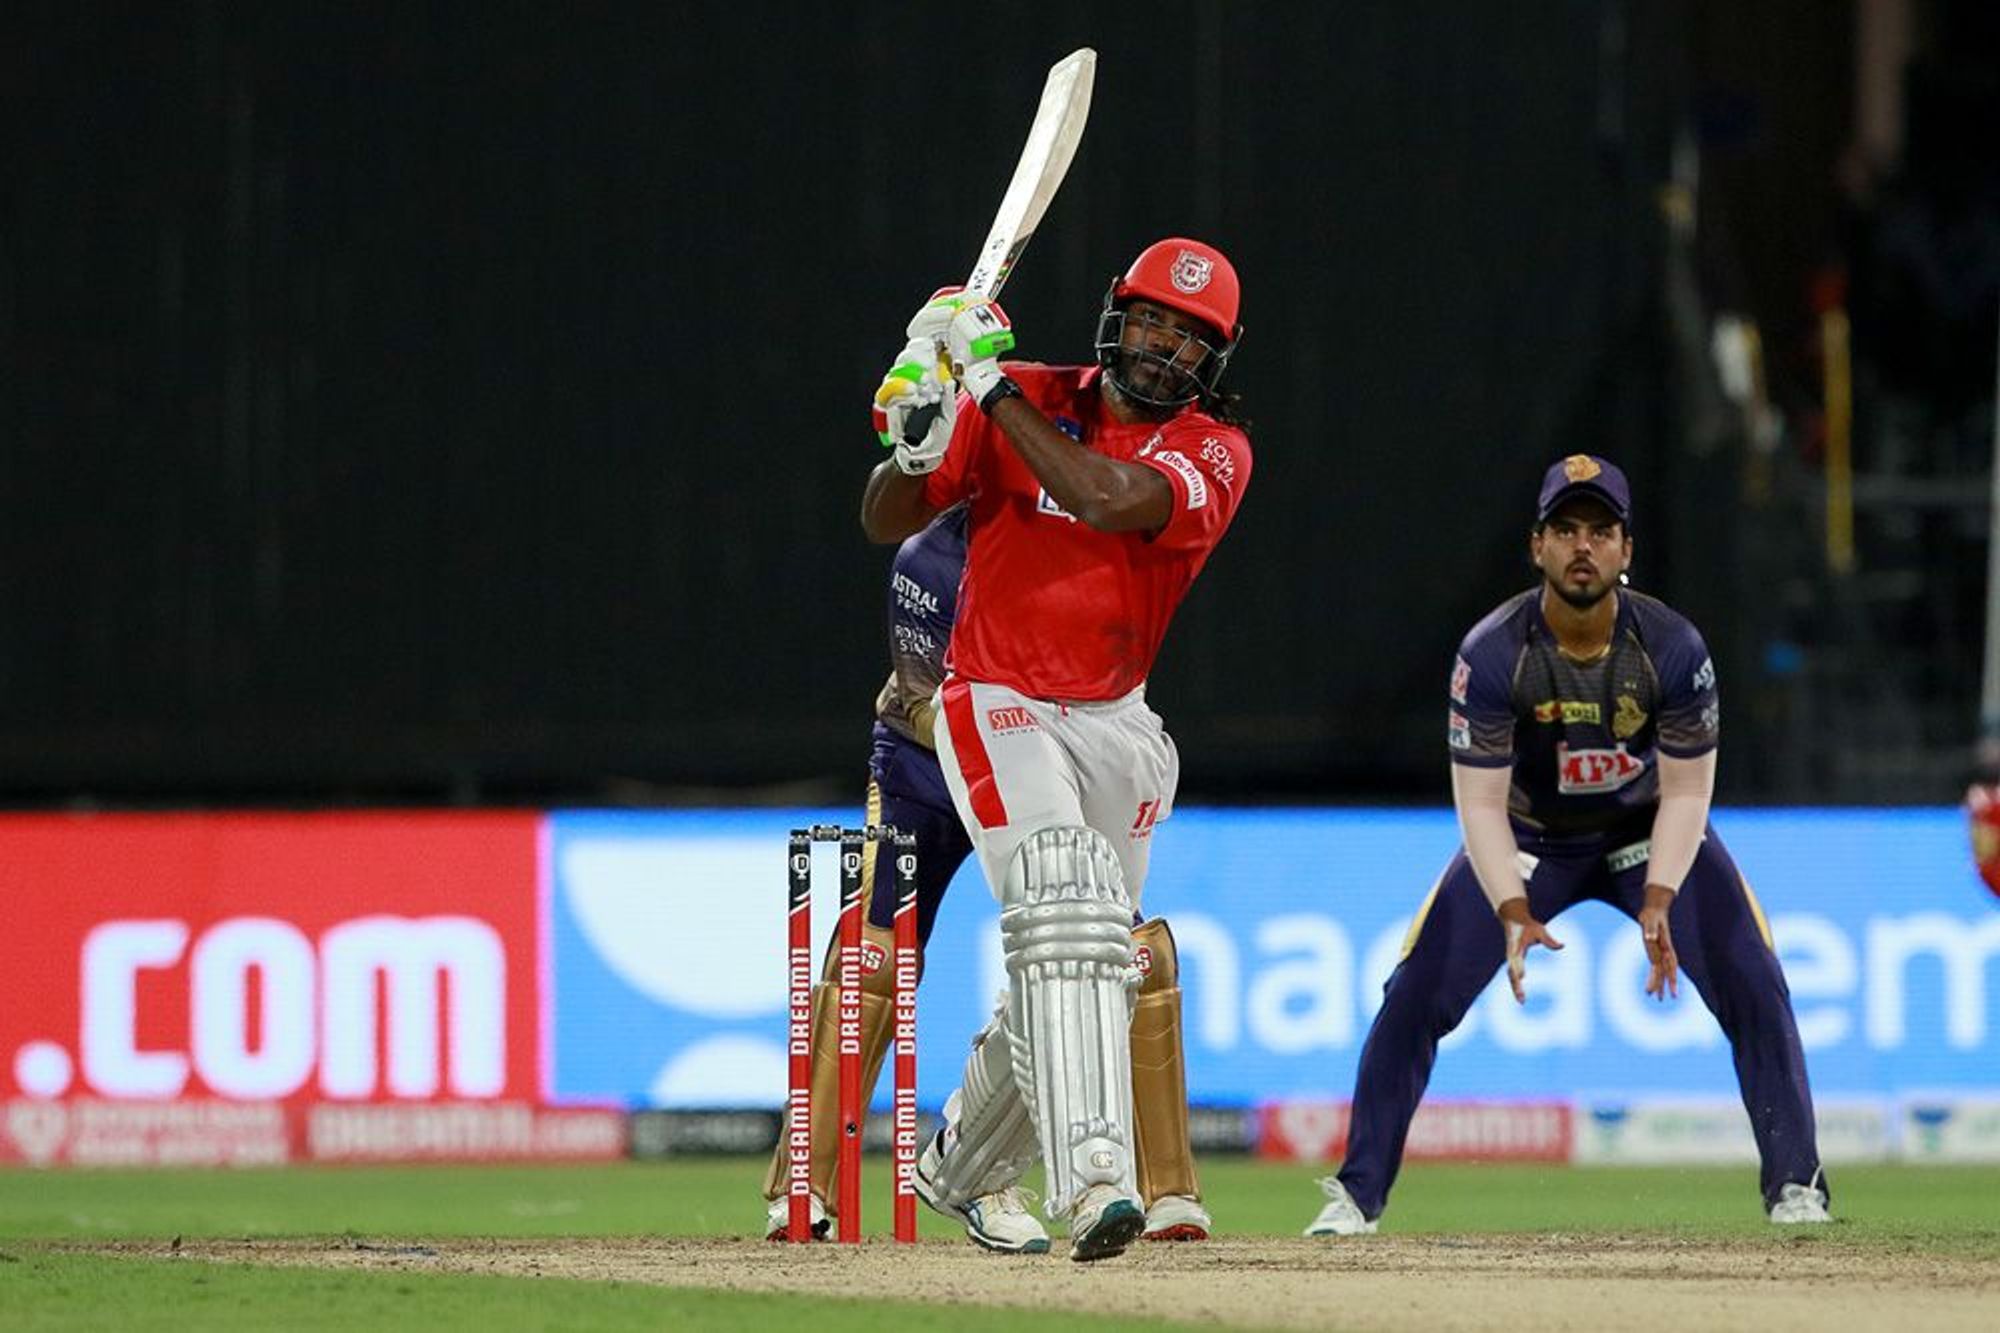 IPL 2020 | This is the hungriest I have ever seen Chris Gayle play, proclaims KL Rahul